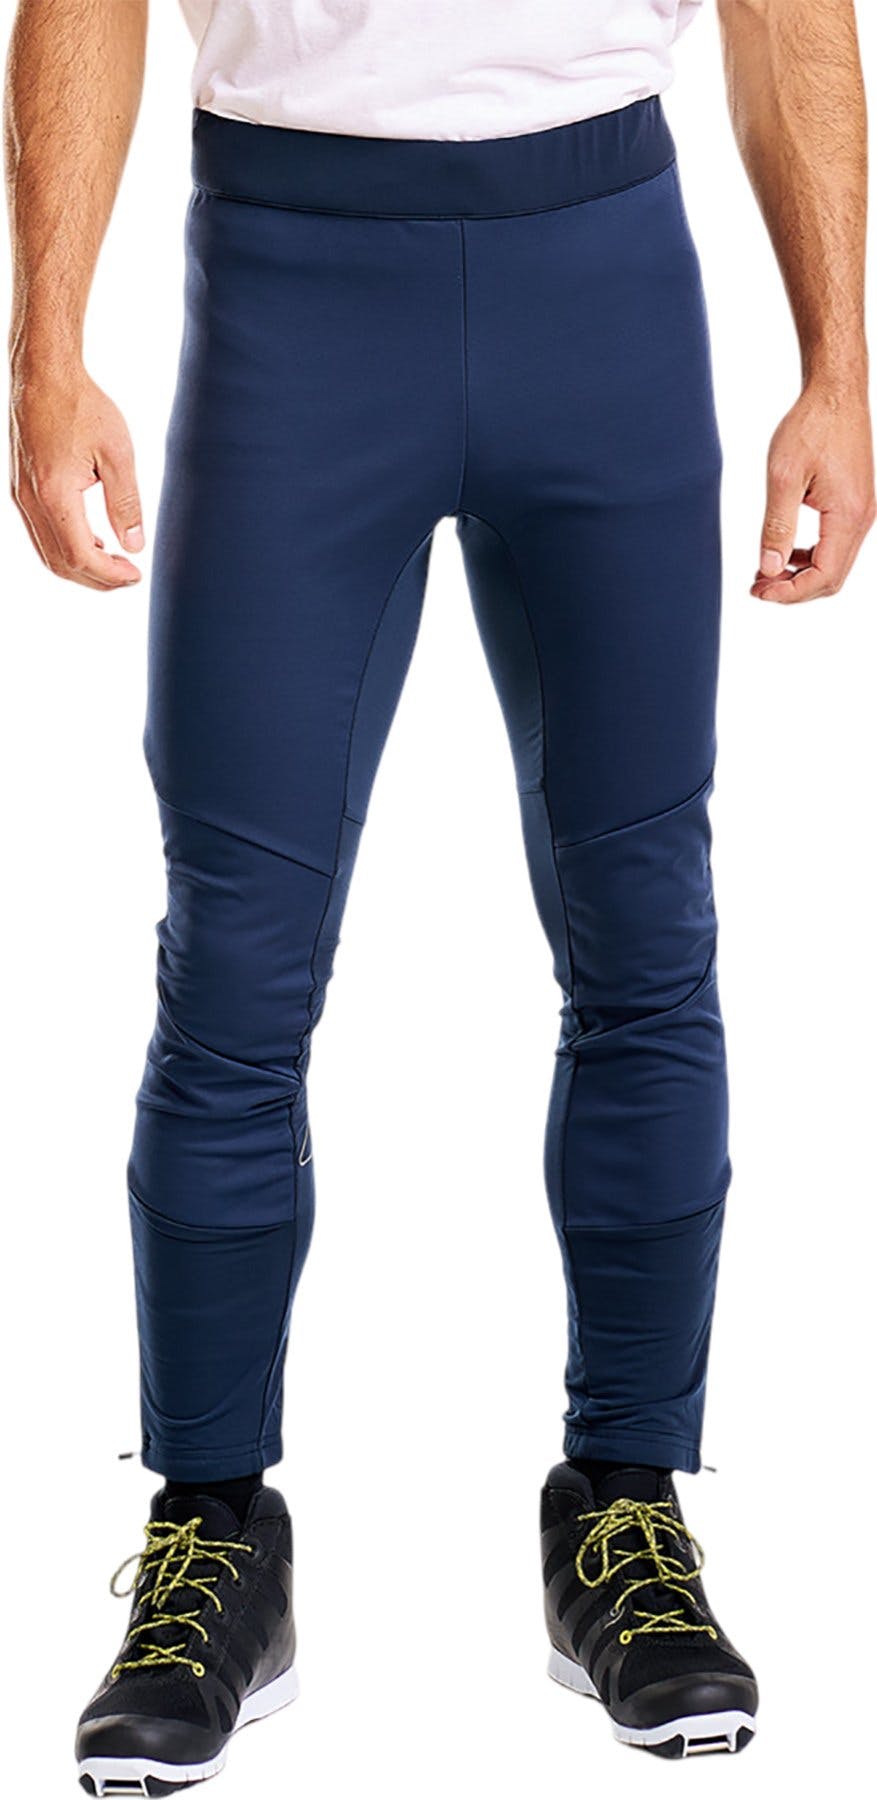 Product image for Delda Light Softshell Tight Pants - Men's